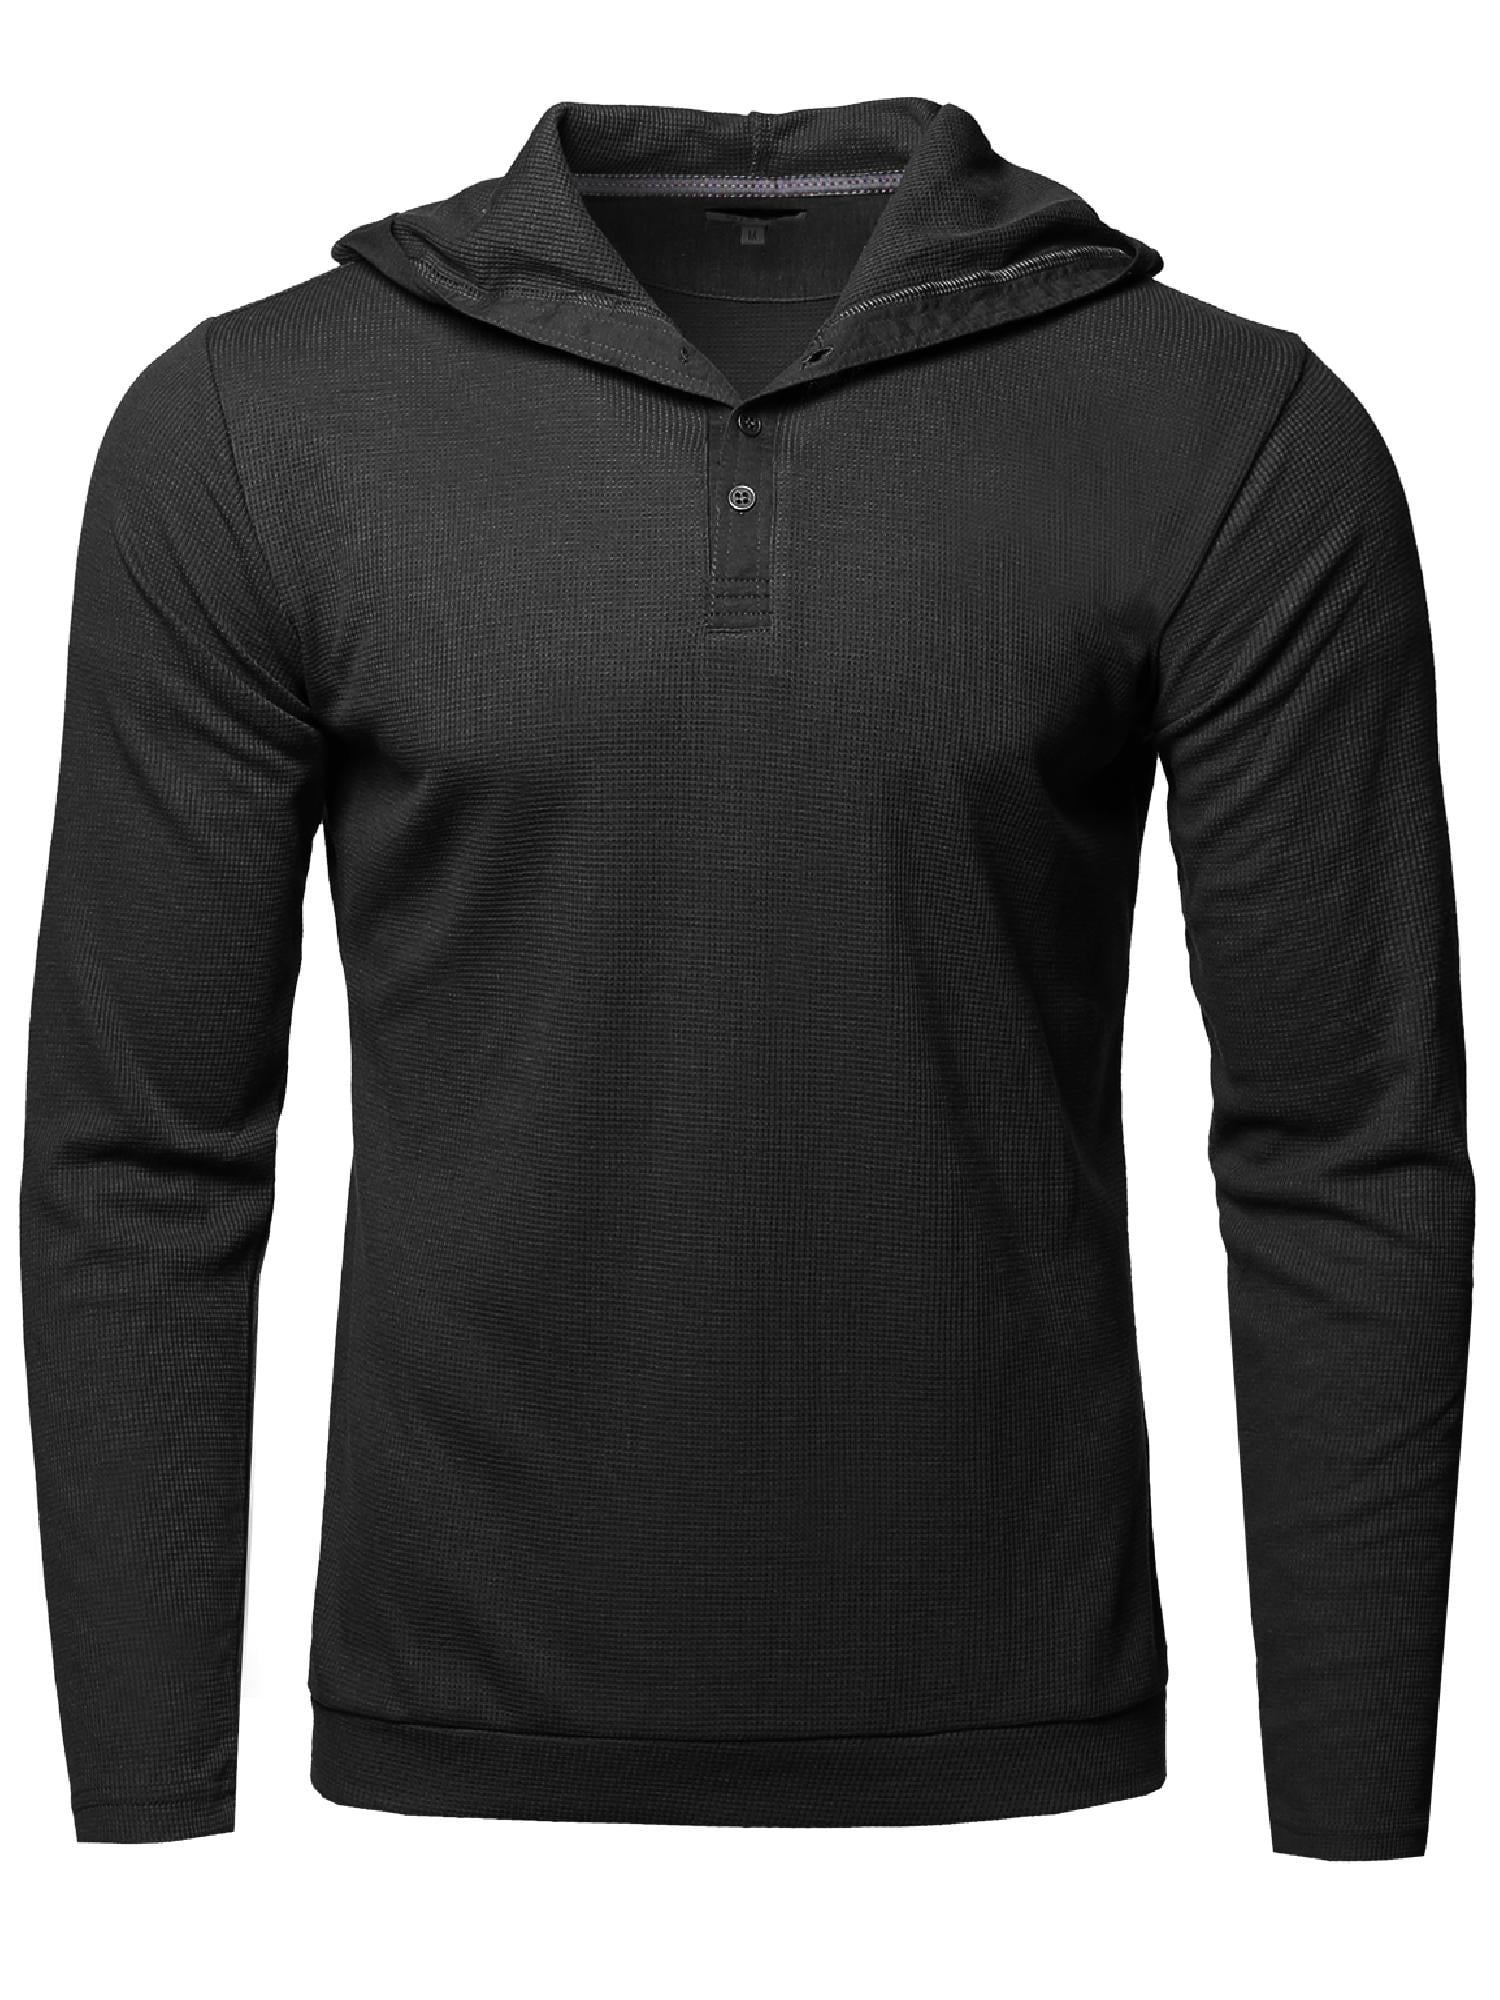 FashionOutfit Men's Premium Quality Long Sleeves Thermal Hooded Henley T-Shirt 